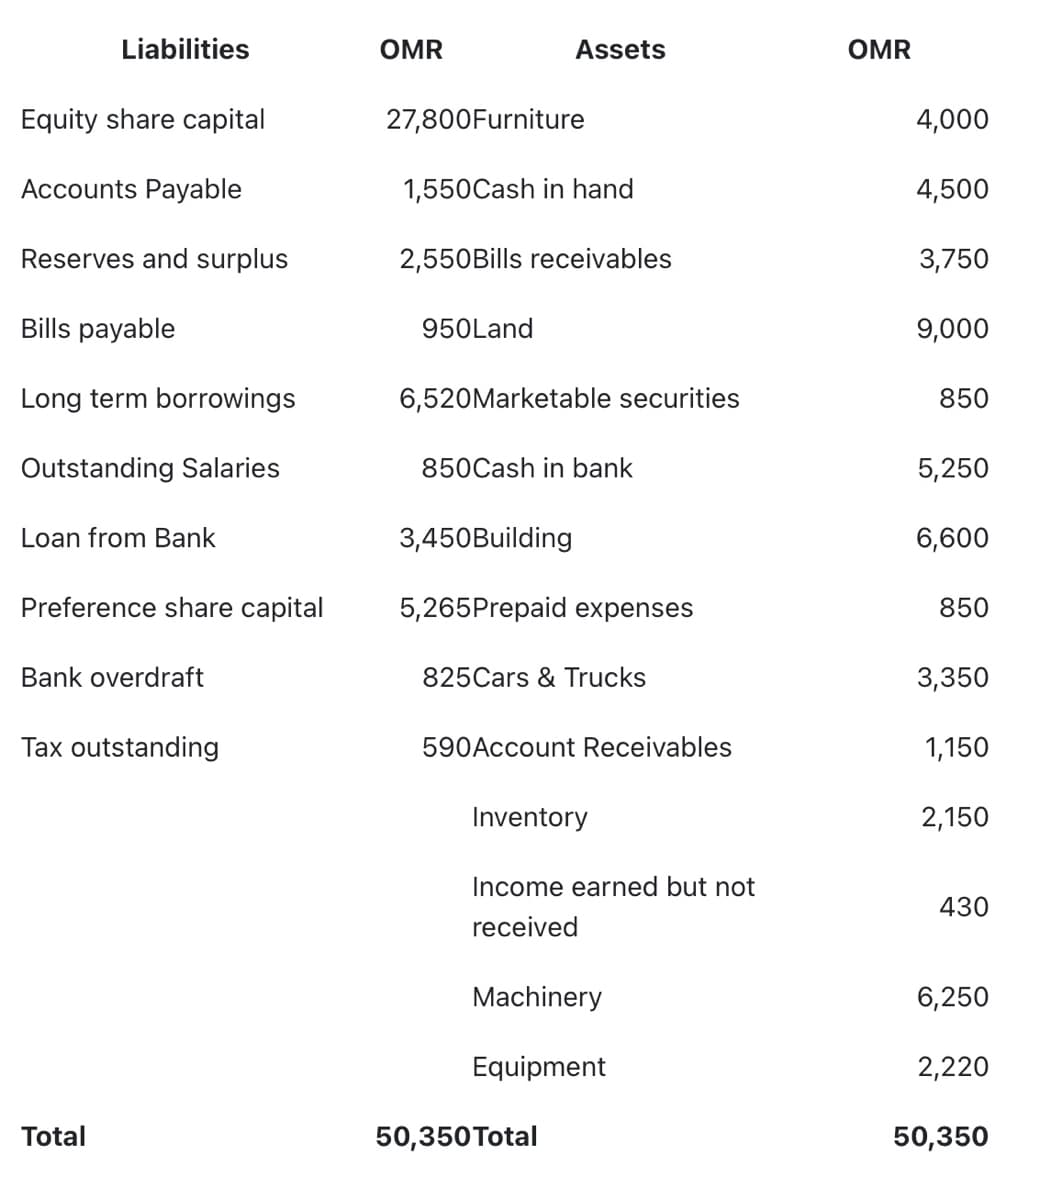 Liabilities
OMR
Assets
OMR
Equity share capital
27,800Furniture
4,000
Accounts Payable
1,550Cash in hand
4,500
Reserves and surplus
2,550Bills receivables
3,750
Bills payable
950Land
9,000
Long term borrowings
6,520Marketable securities
850
Outstanding Salaries
850Cash in bank
5,250
Loan from Bank
3,450Building
6,600
Preference share capital
5,265Prepaid expenses
850
Bank overdraft
825Cars & Trucks
3,350
Tax outstanding
590Account Receivables
1,150
Inventory
2,150
Income earned but not
430
received
Machinery
6,250
Equipment
2,220
Total
50,350Total
50,350
